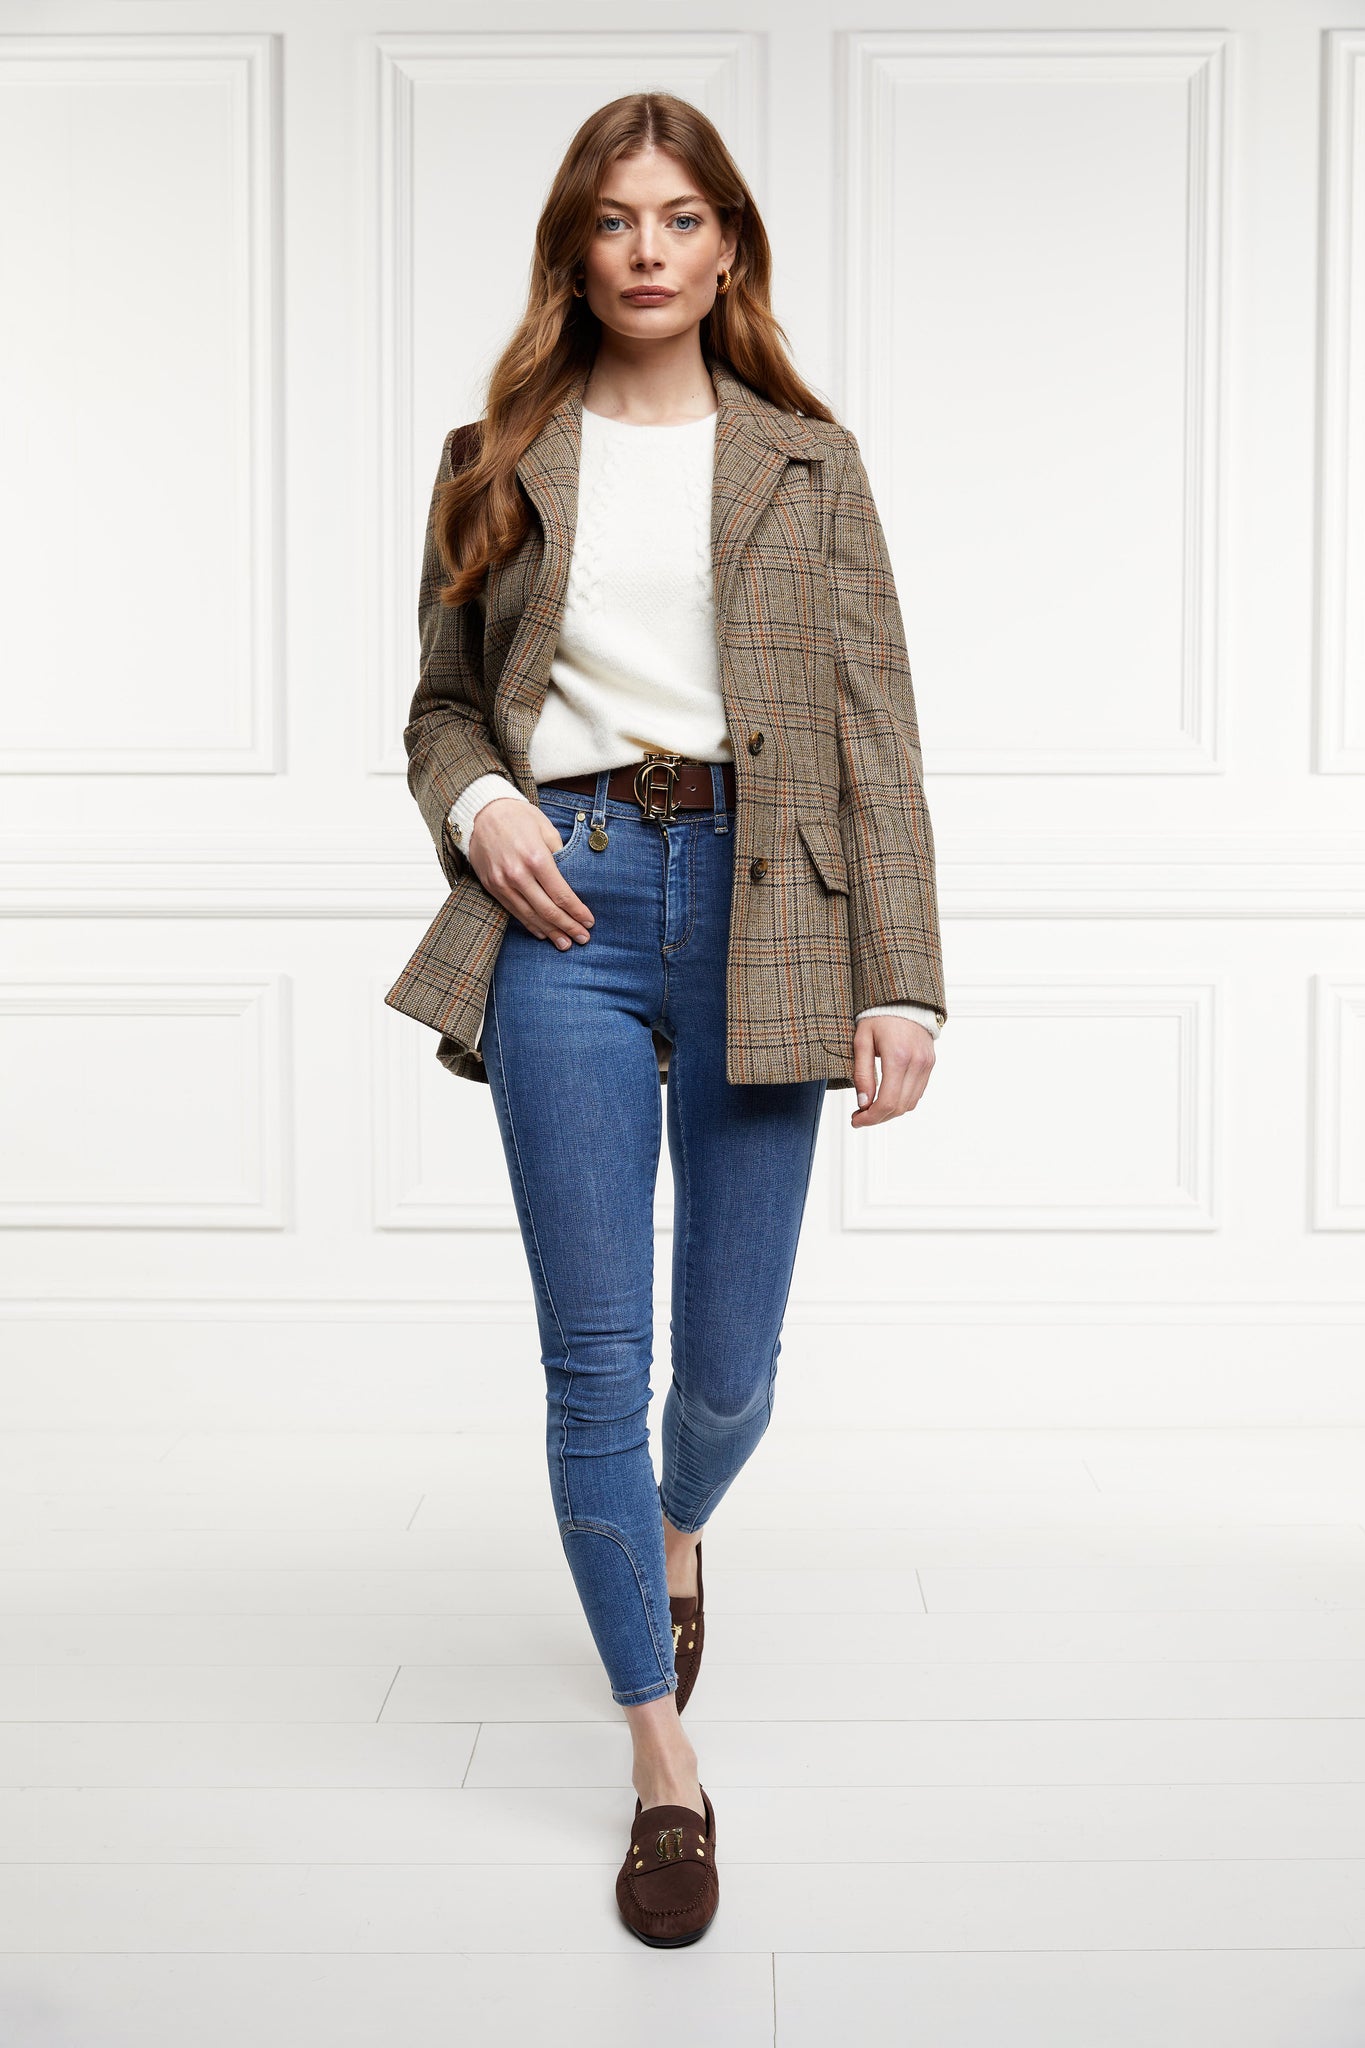 Classic brown suede loafers with a leather sole and top stitching details and gold hardware paired with skinny denim jeans, brown belt, cream crew neck knit and bredon tweed blazer